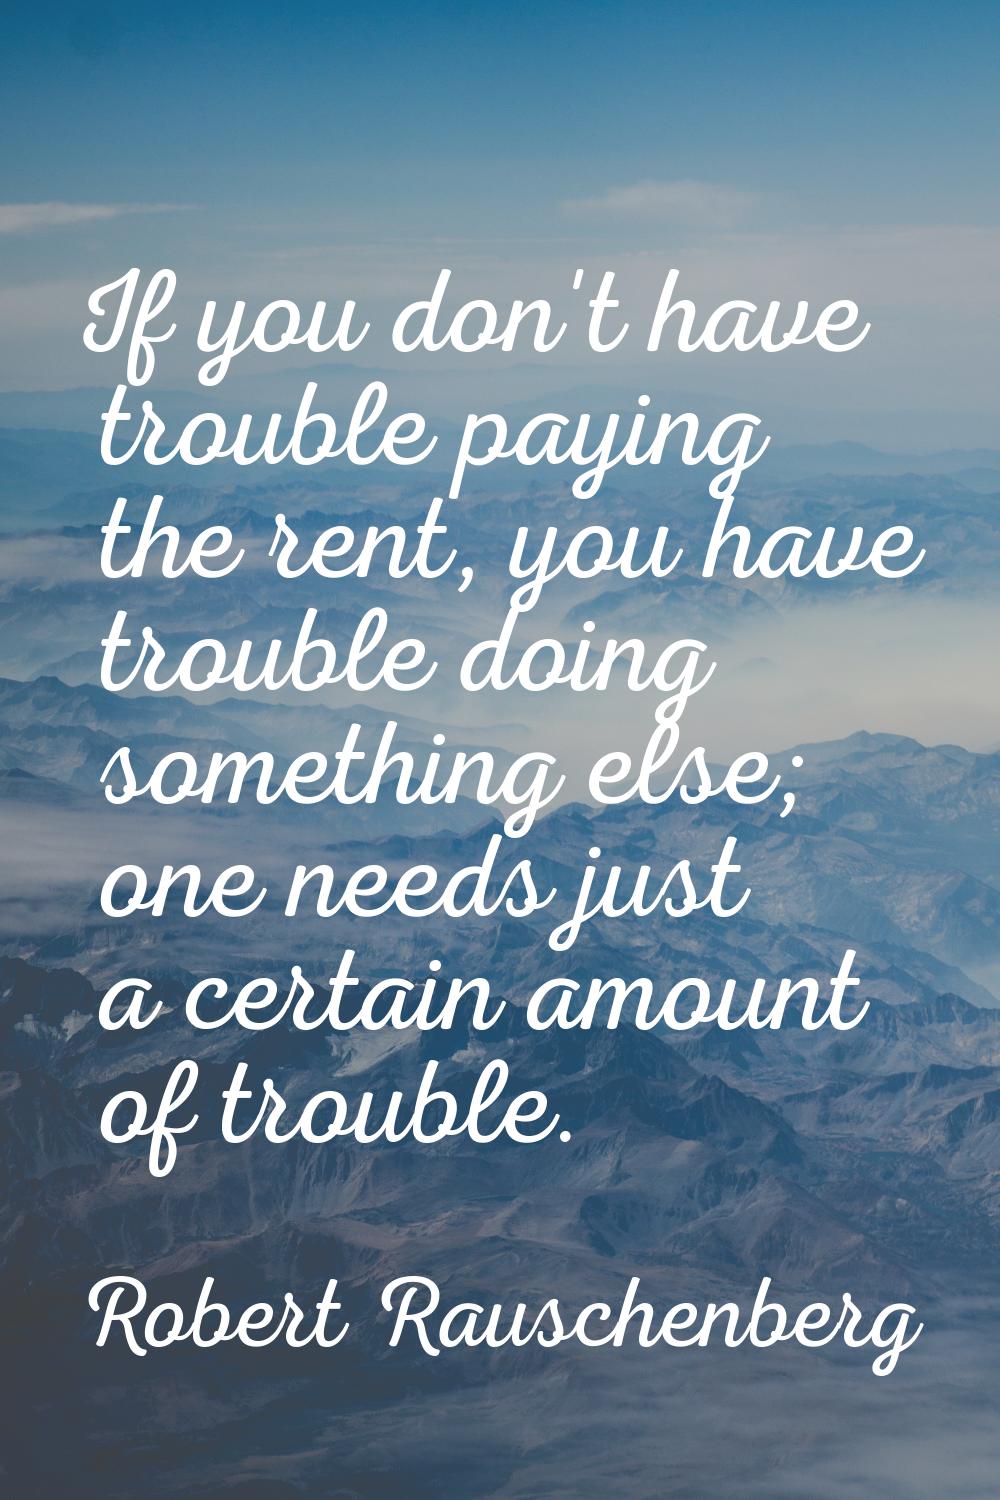 If you don't have trouble paying the rent, you have trouble doing something else; one needs just a 